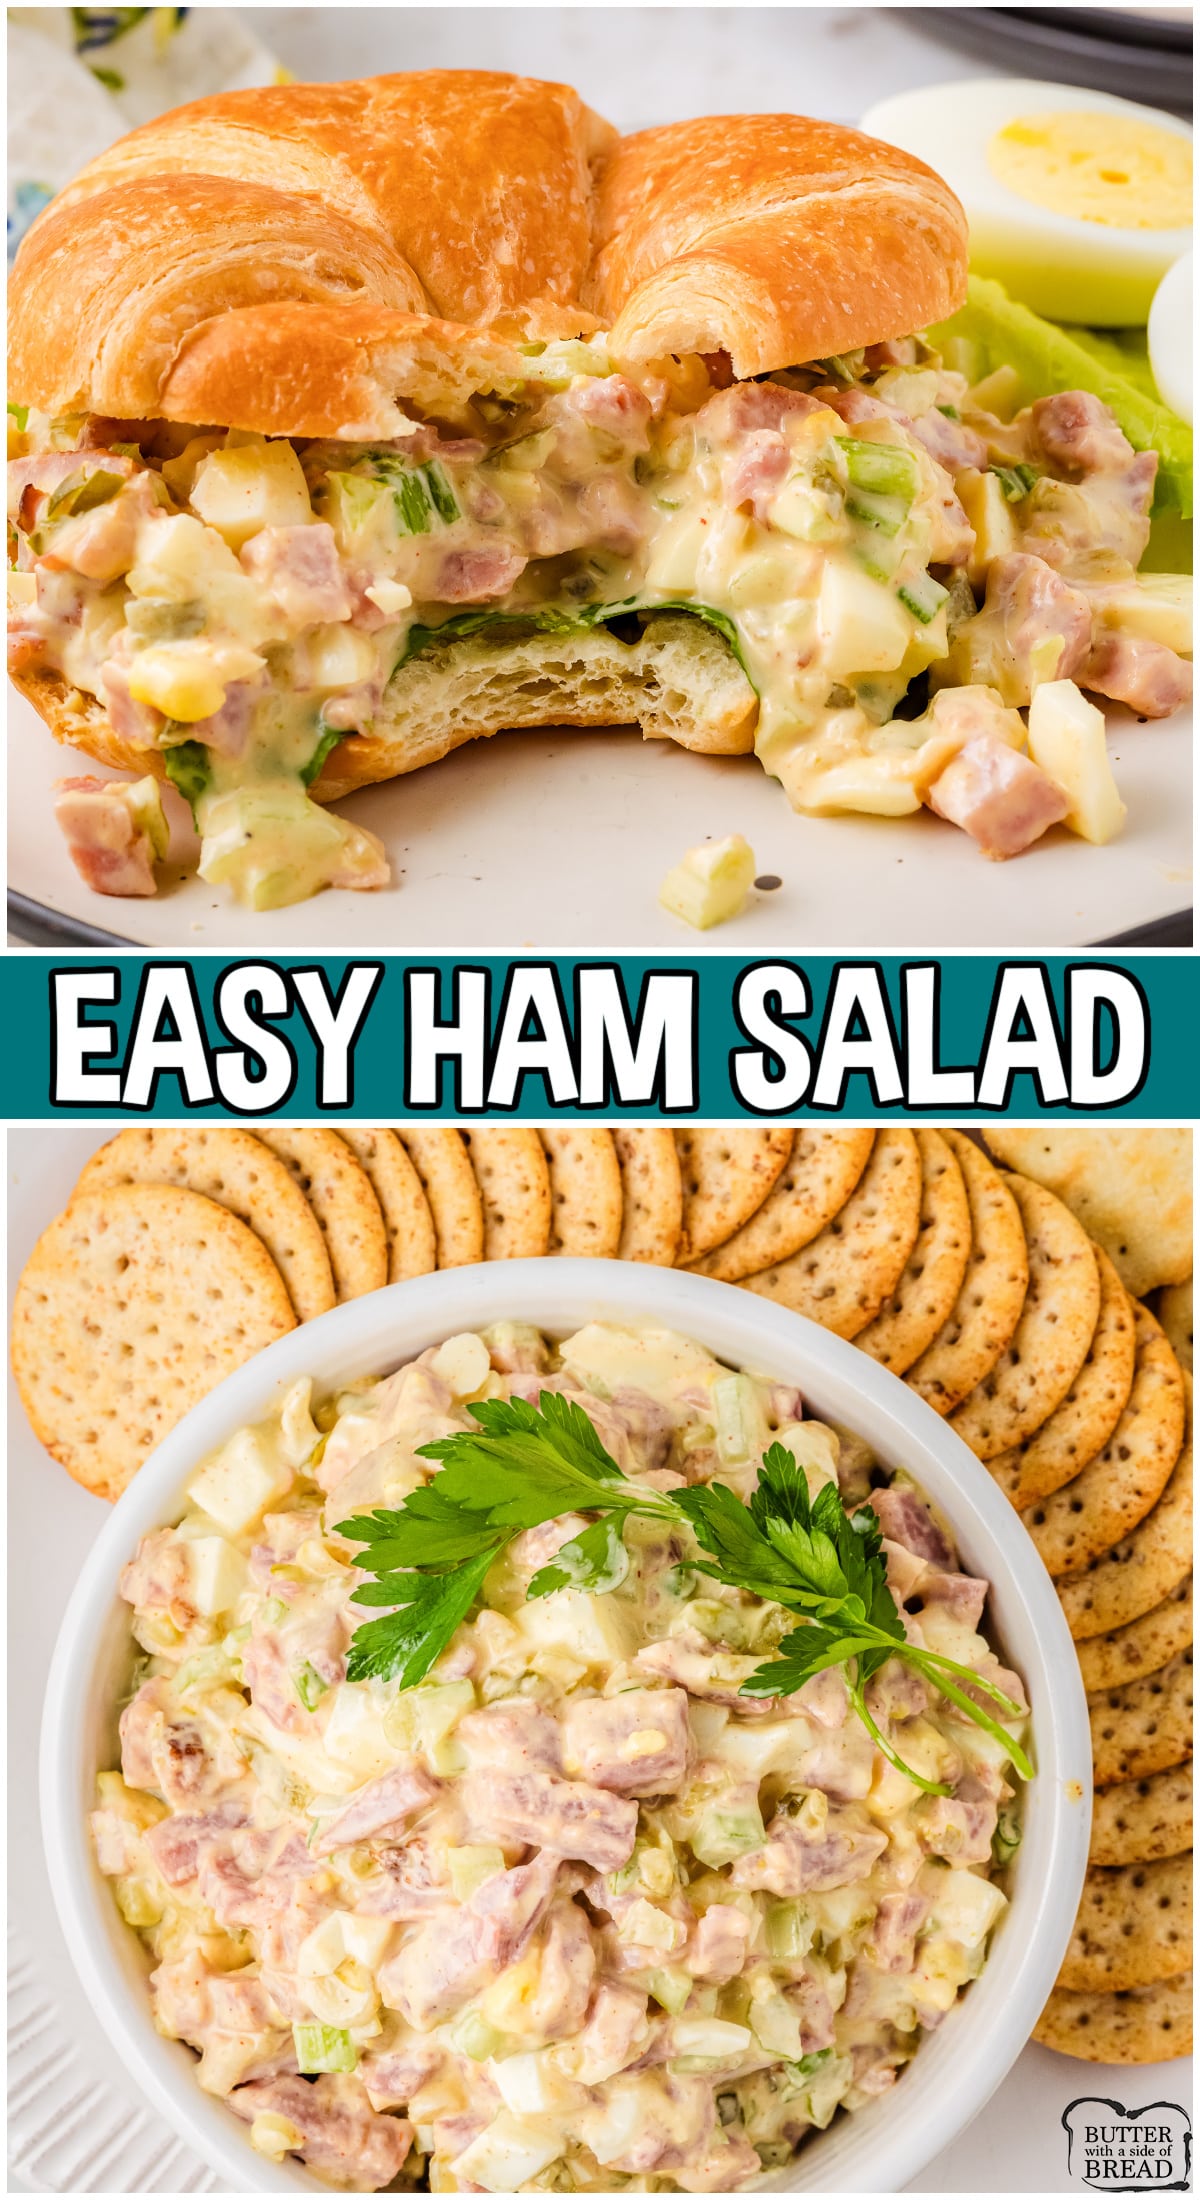 Delightful Old Fashioned Ham Salad with classic ingredients & perfect balance of heartiness & flavor for an appetizer, lunch or light dinner!